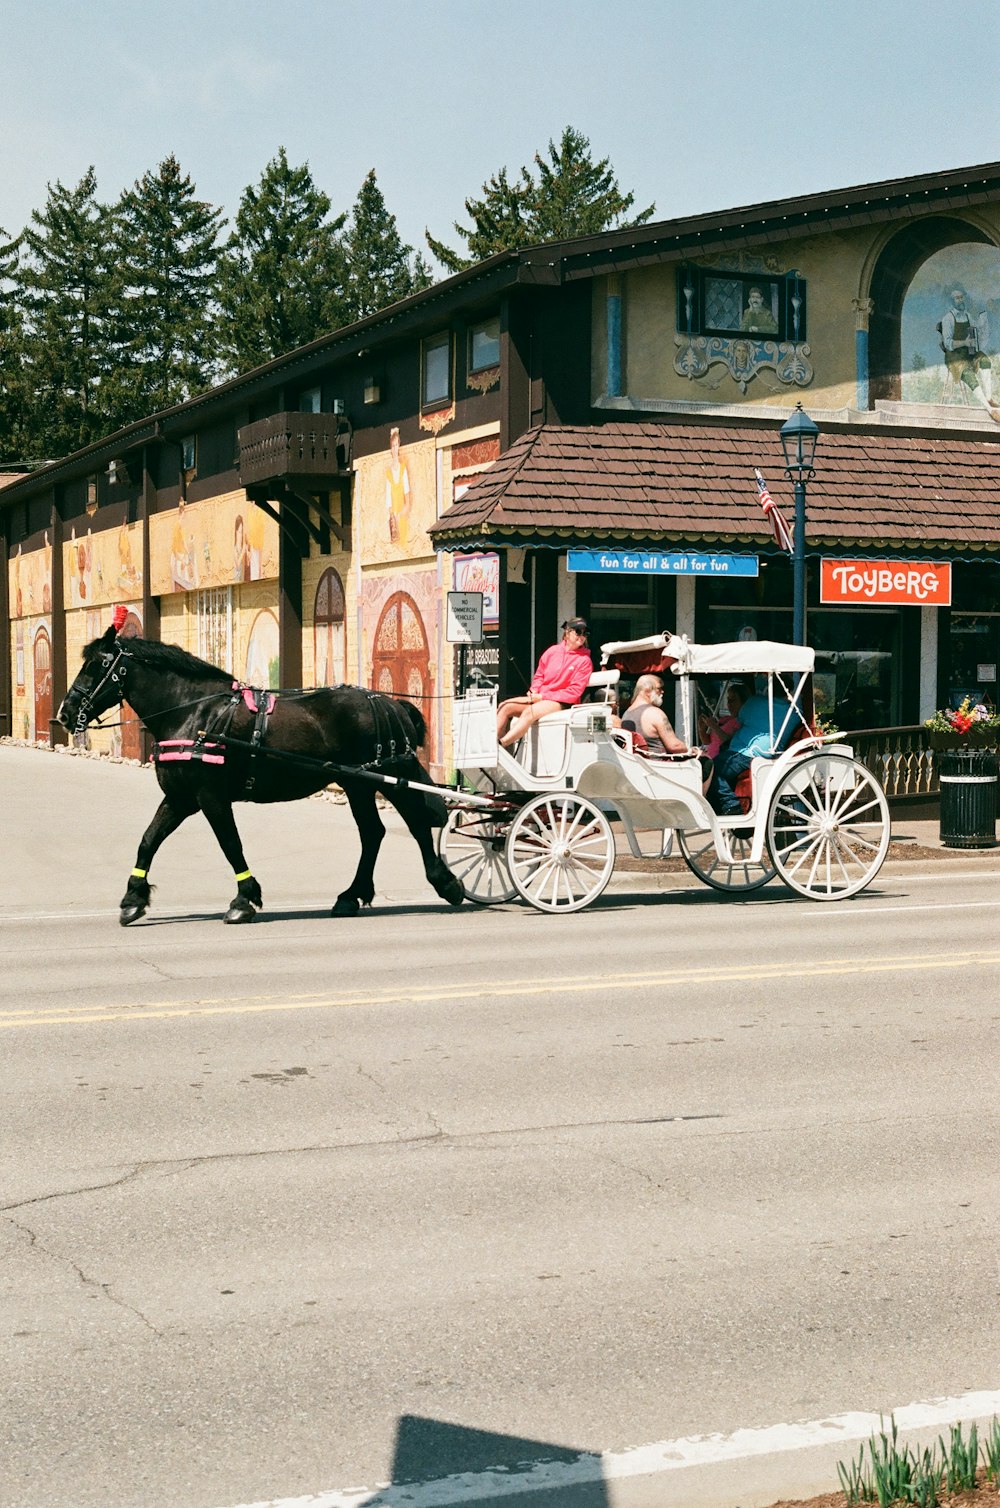 a horse pulling a carriage down a street